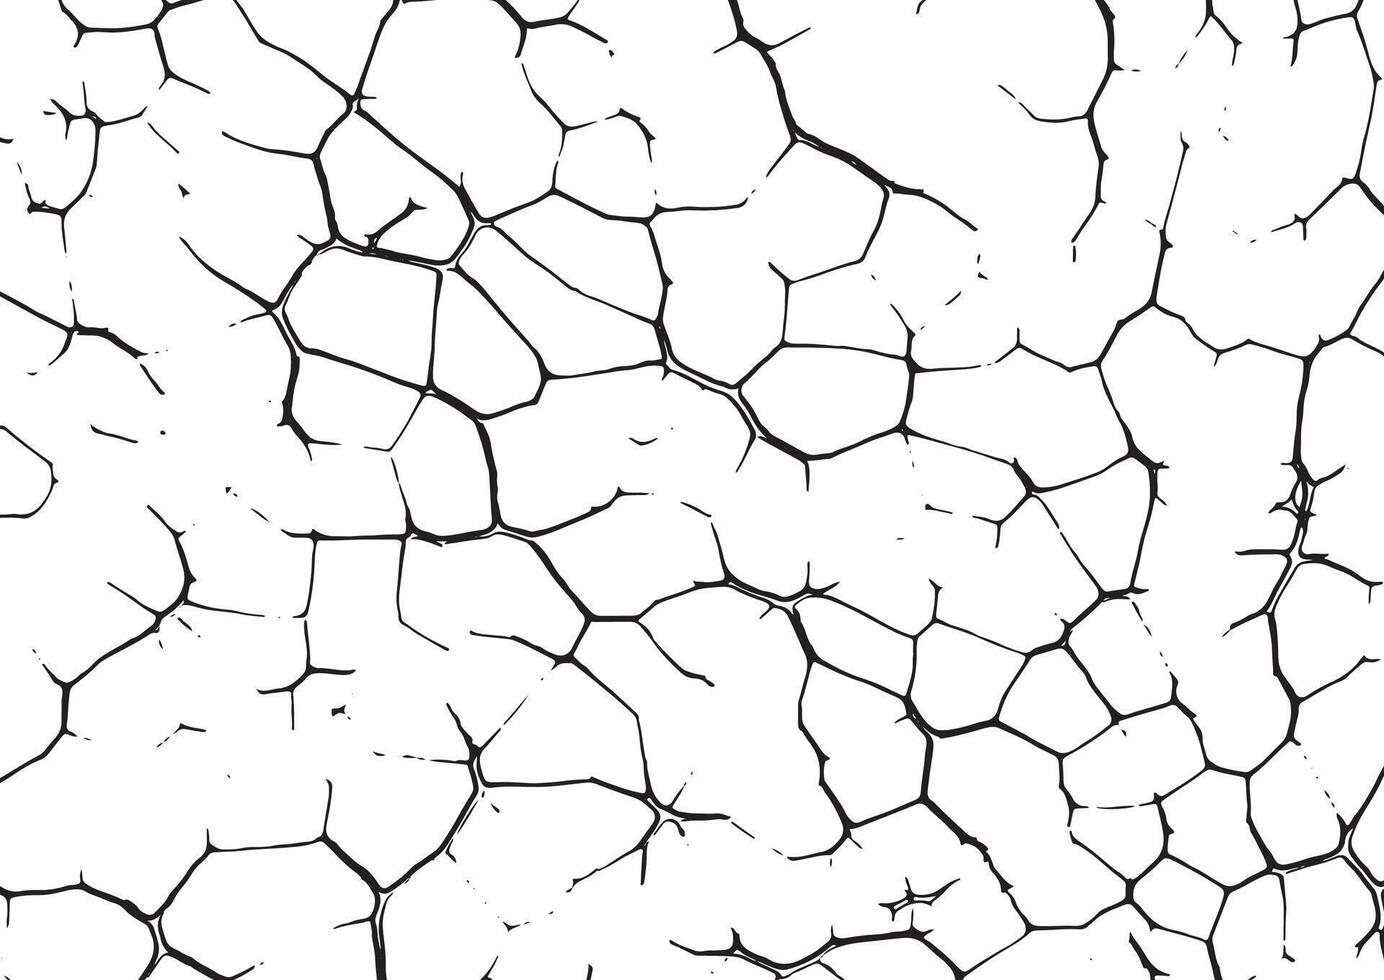 Grunge background of black and white paper. Abstract illustration texture of cracks, chips, dot. vector